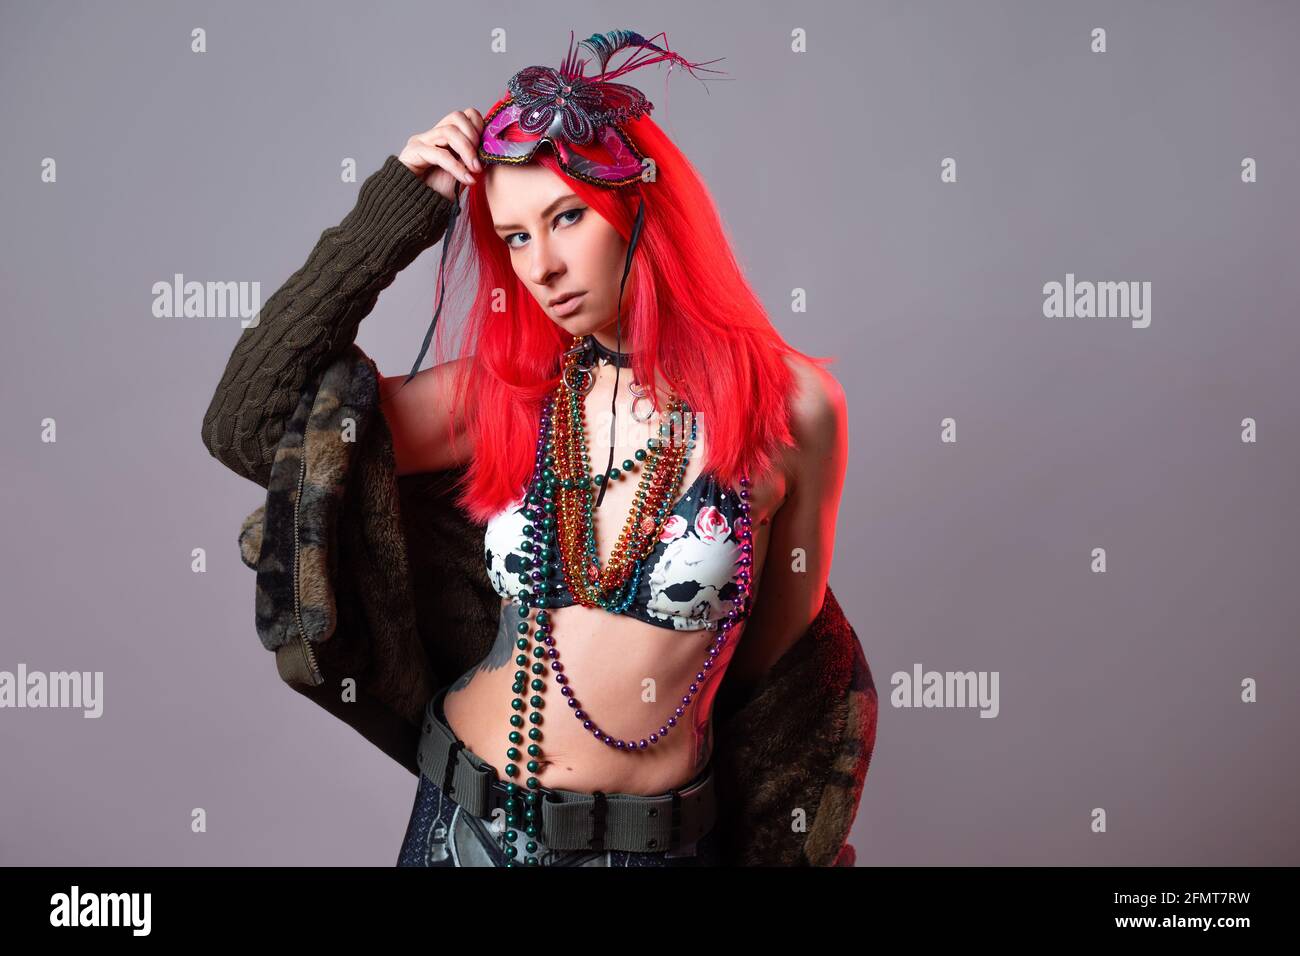 Young woman with bright pink hair in a Mardi Gras costume, beads and a mask with feathers, crazy kitsch outfit. Stock Photo